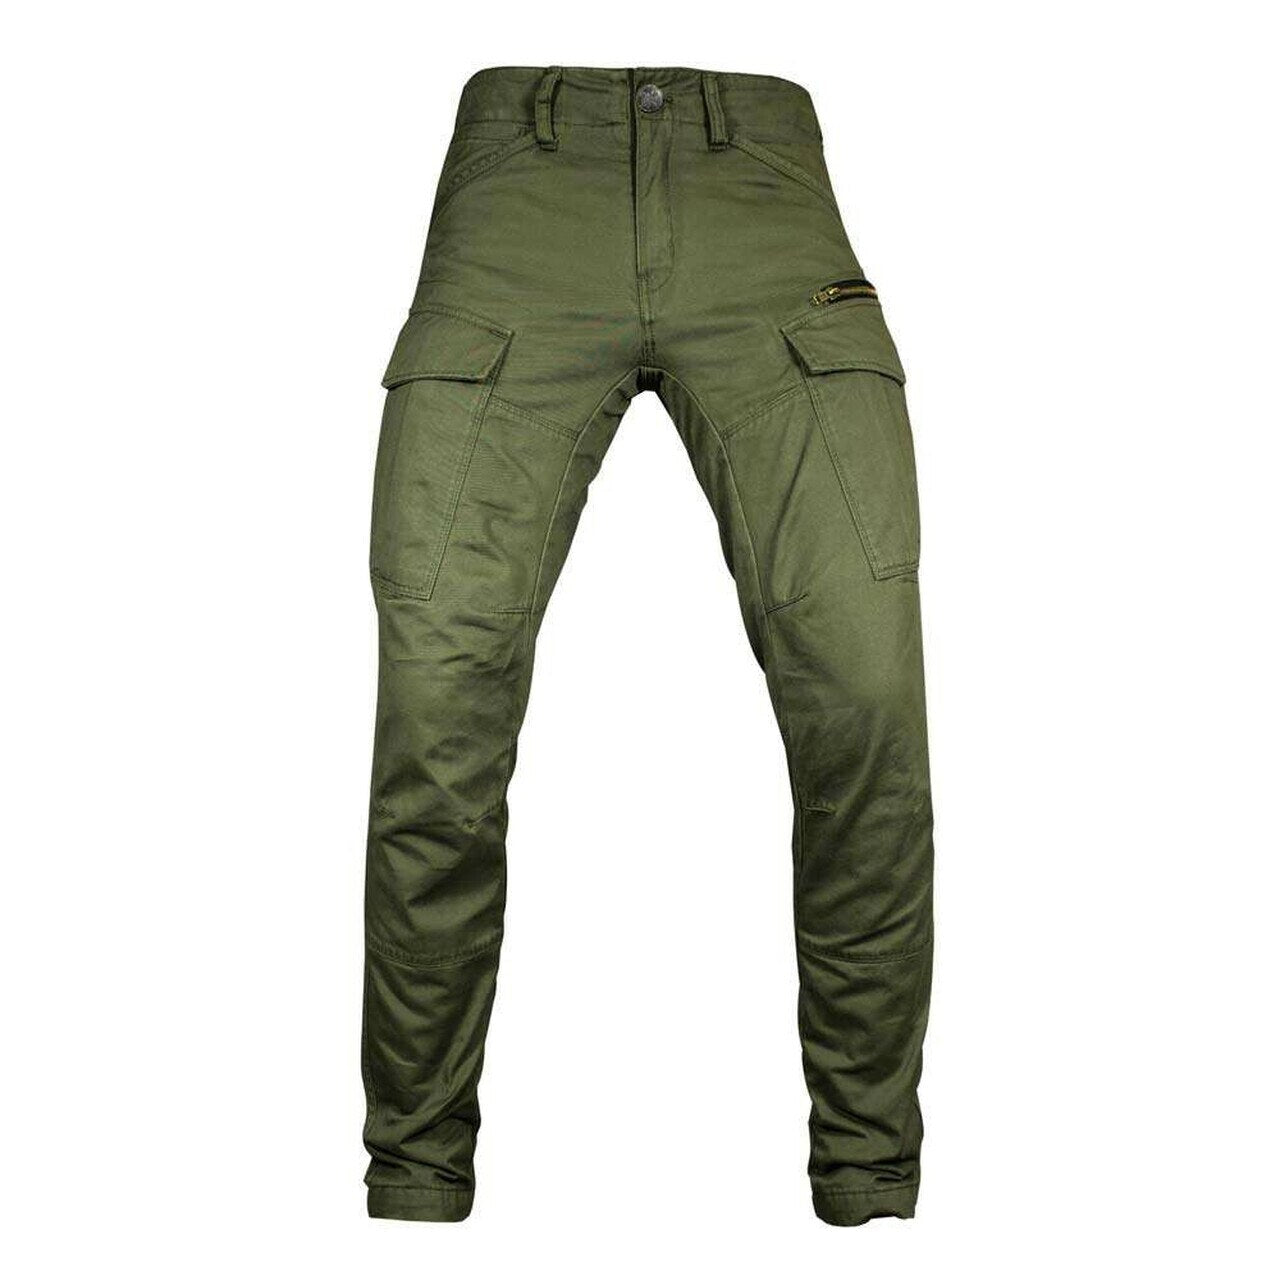 JohnDoe Cargo Pants in Olive colour, front view